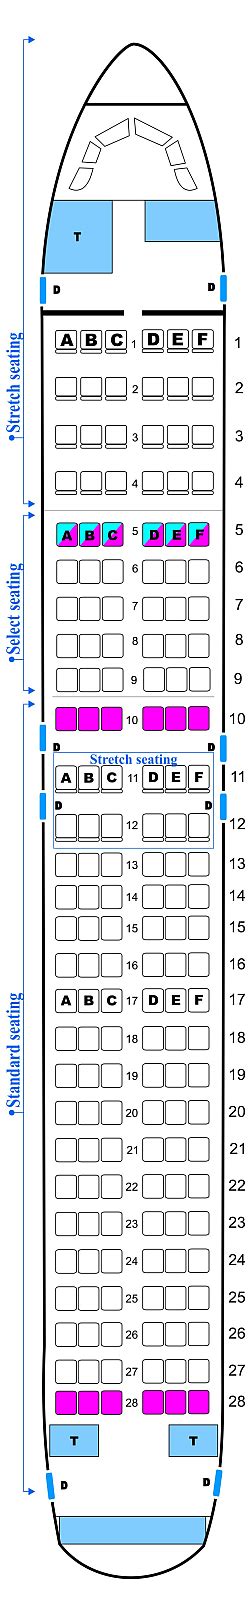 Delta Airbus A320 Seating Chart